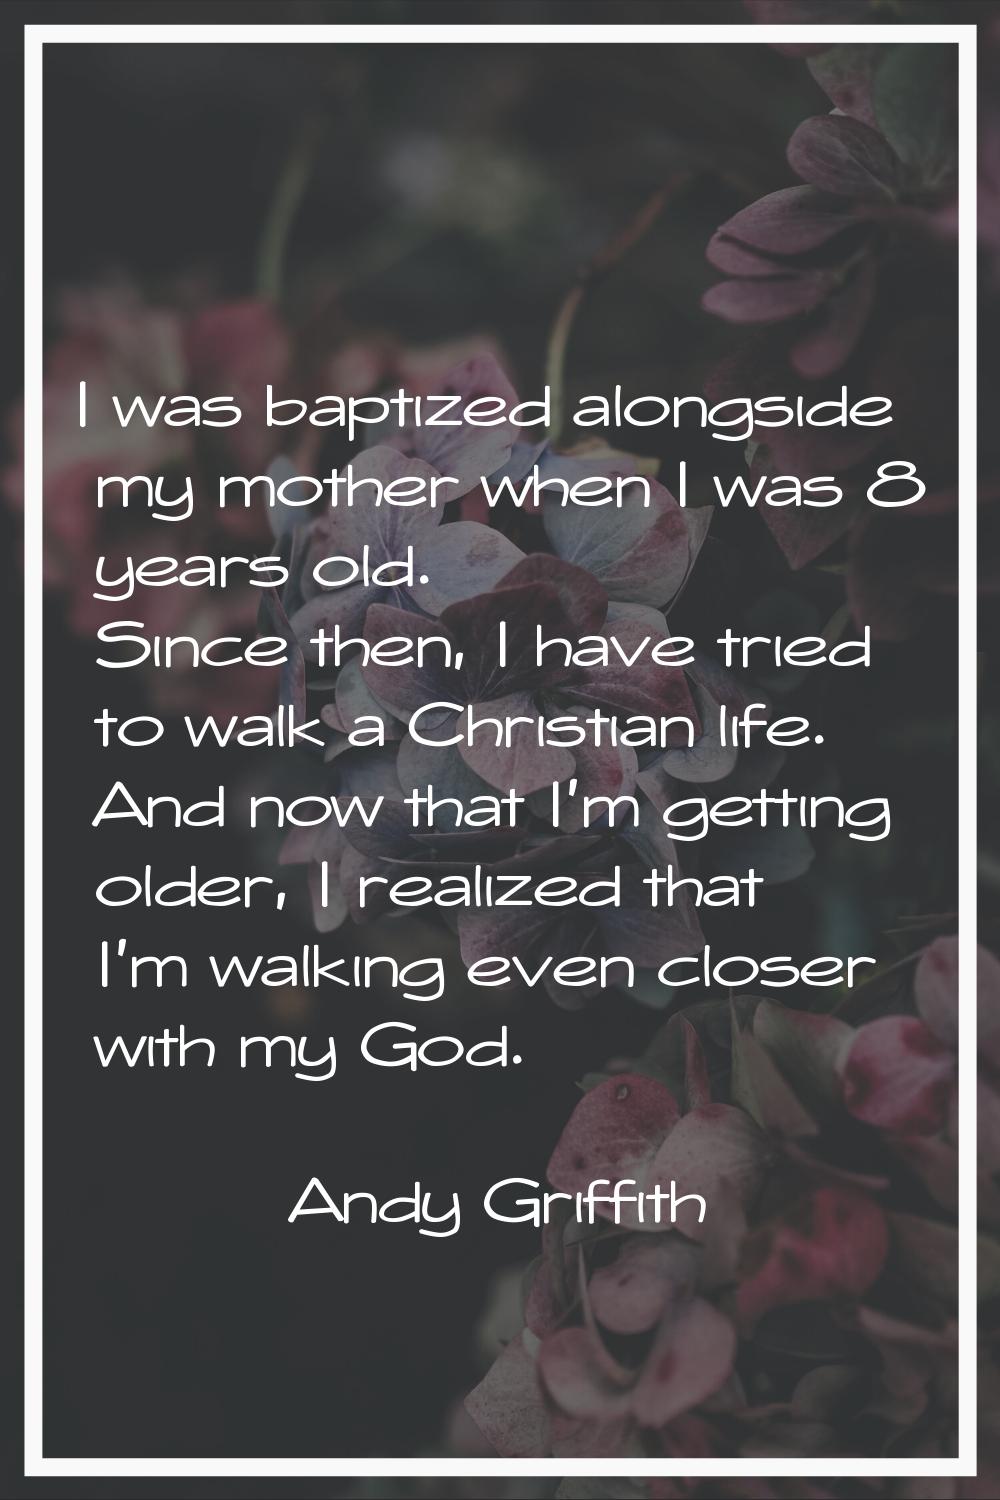 I was baptized alongside my mother when I was 8 years old. Since then, I have tried to walk a Chris